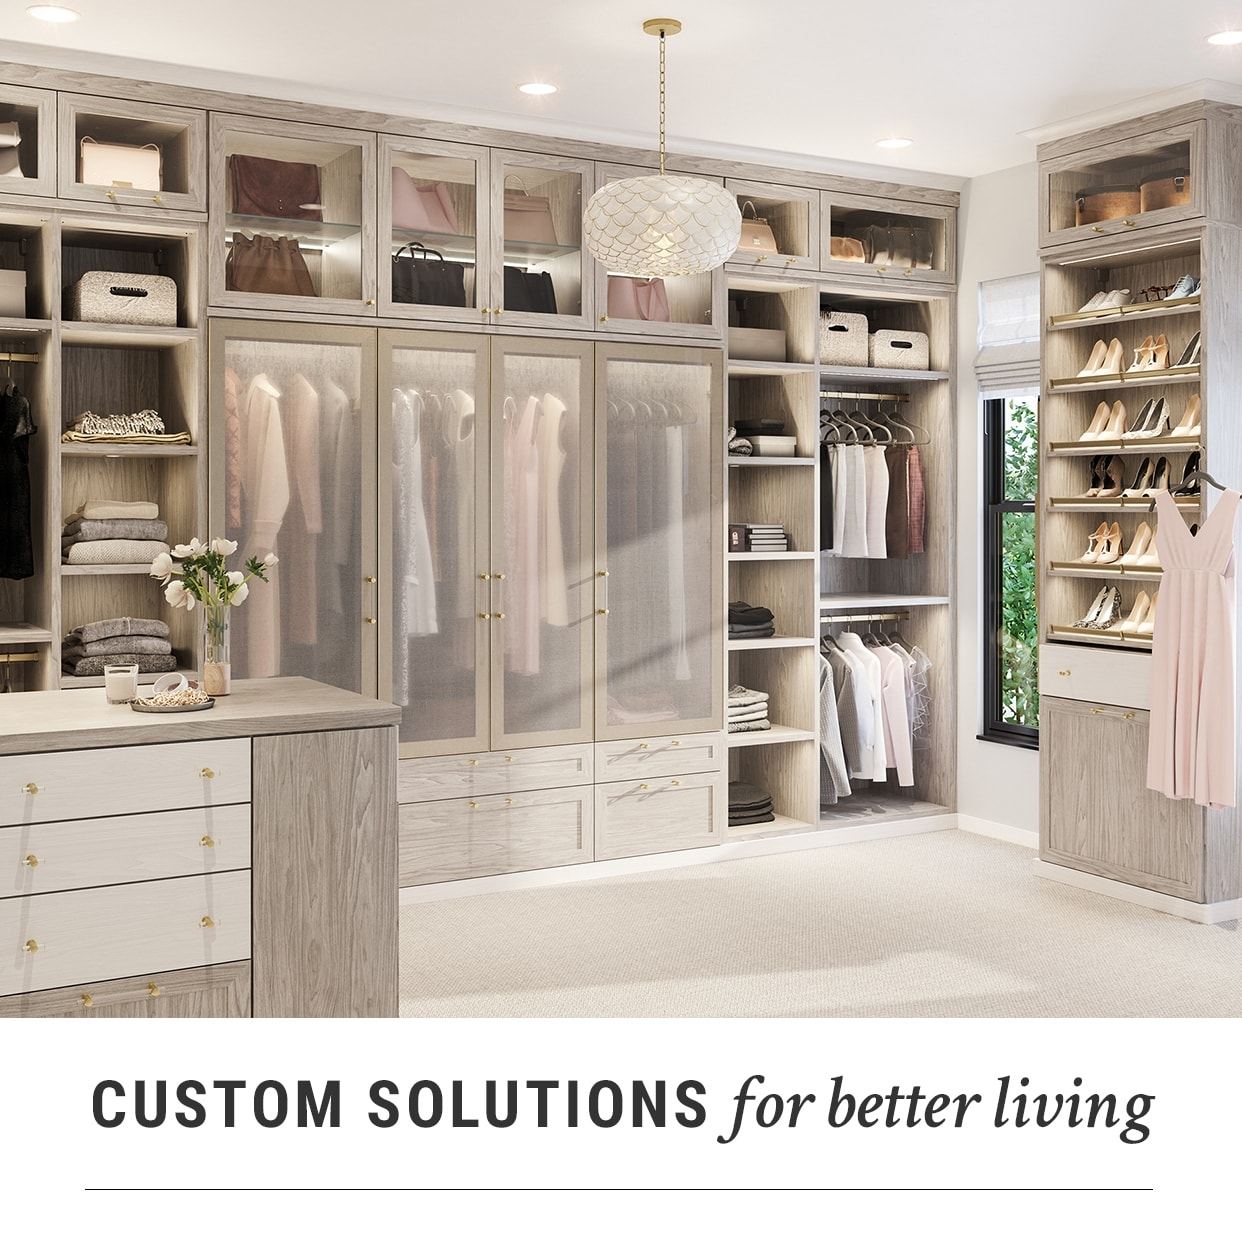 We understand that the design of a closet